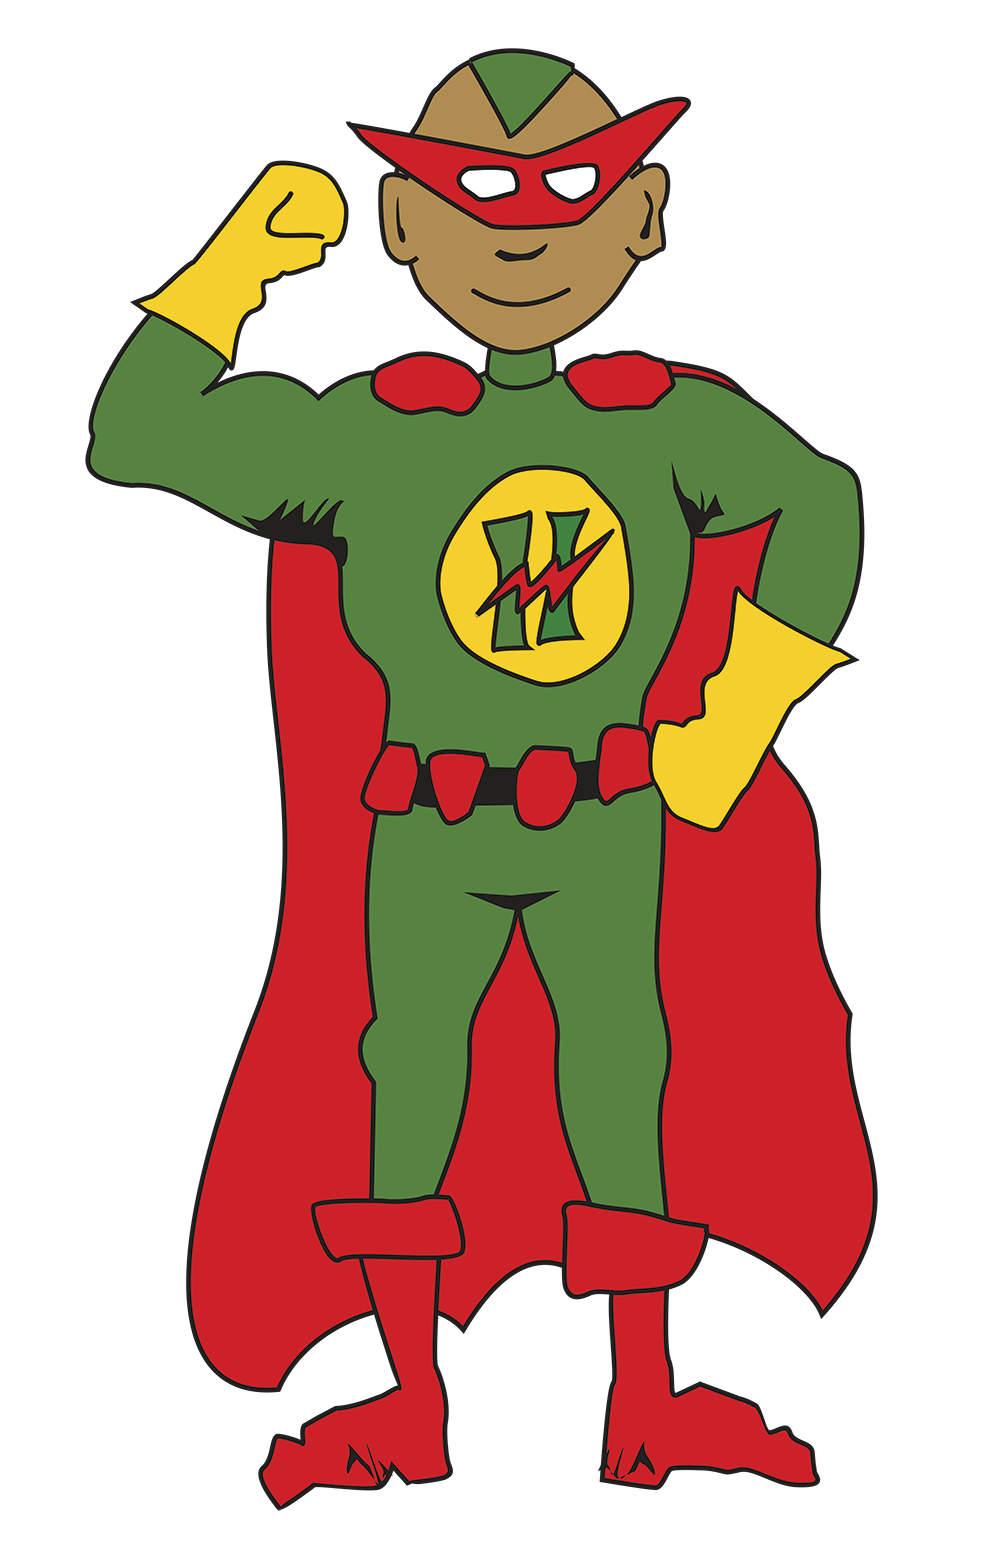 Hero clipart superkids. Our impact hope for